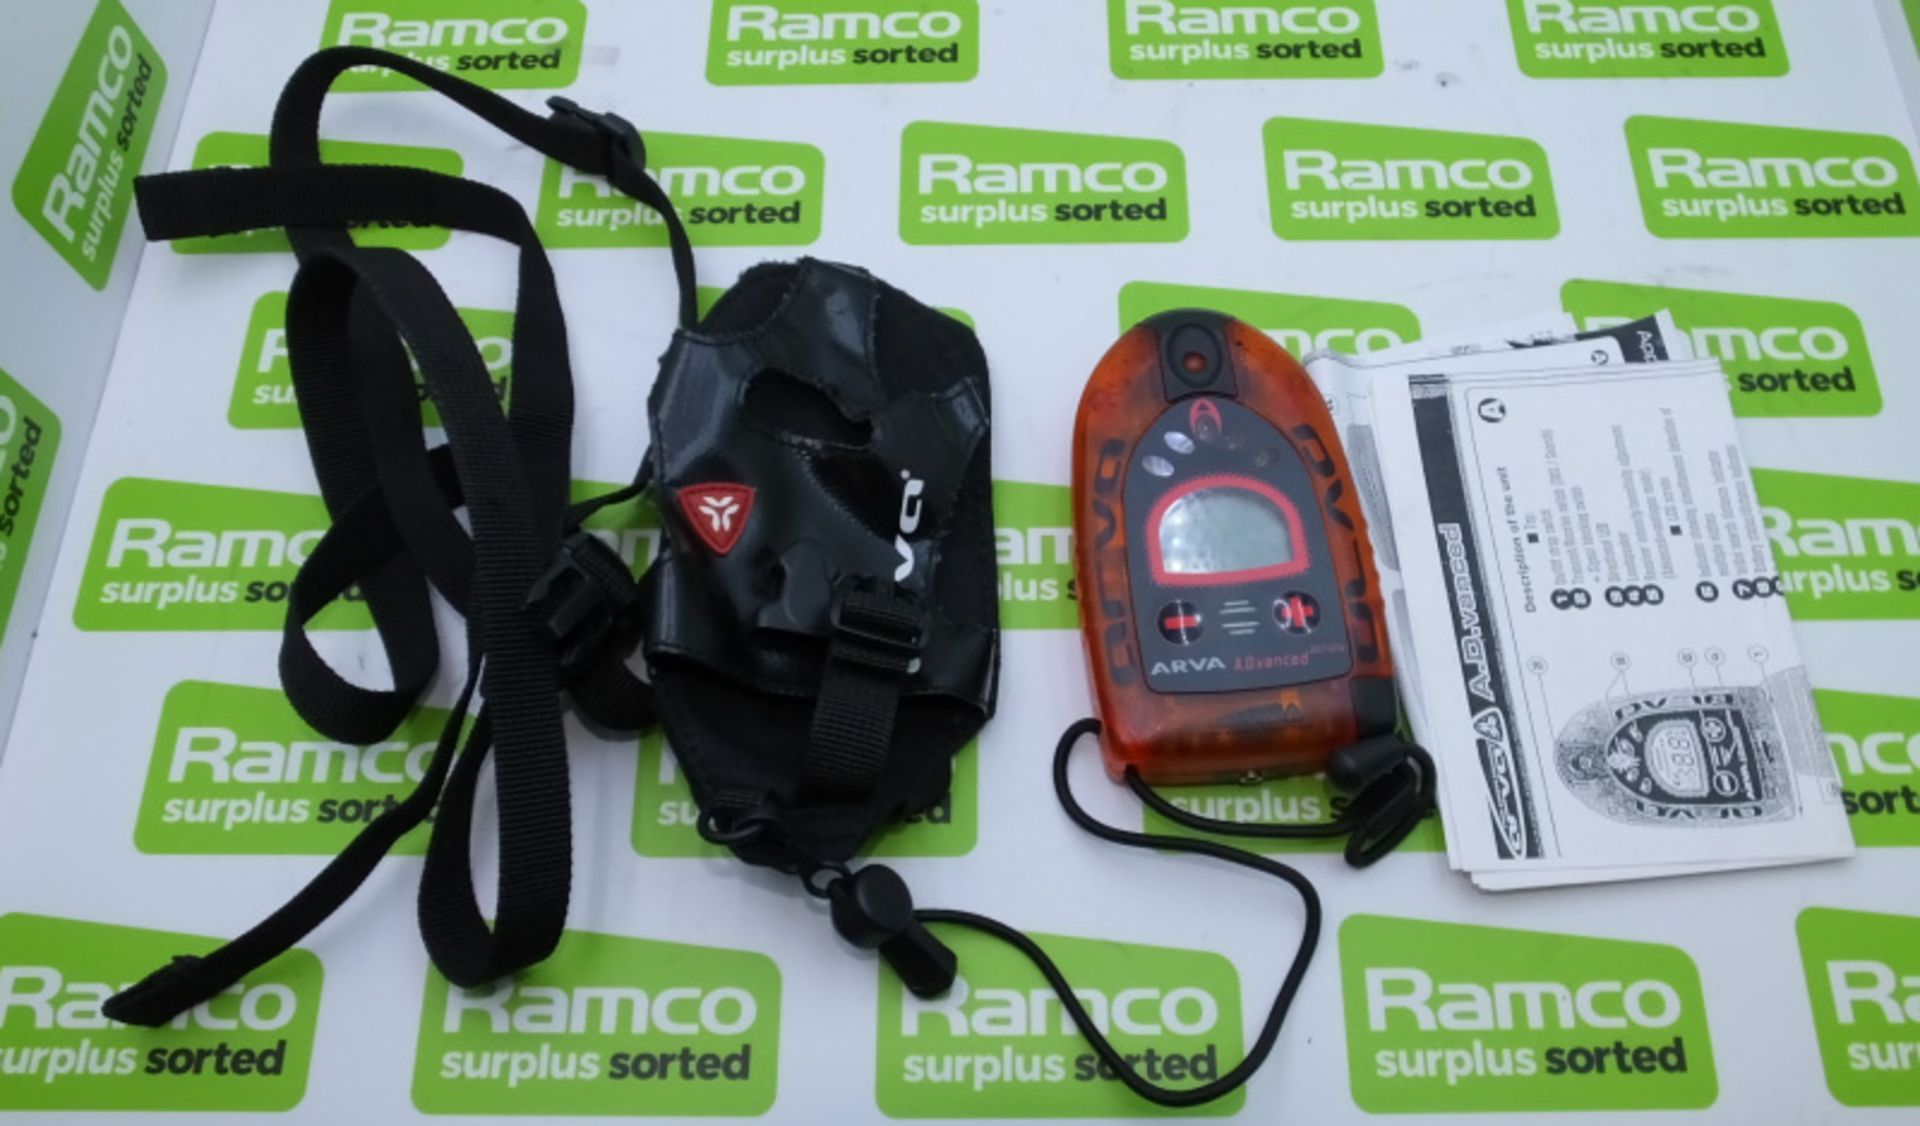 2x Arva avalanche transceivers - Image 2 of 2